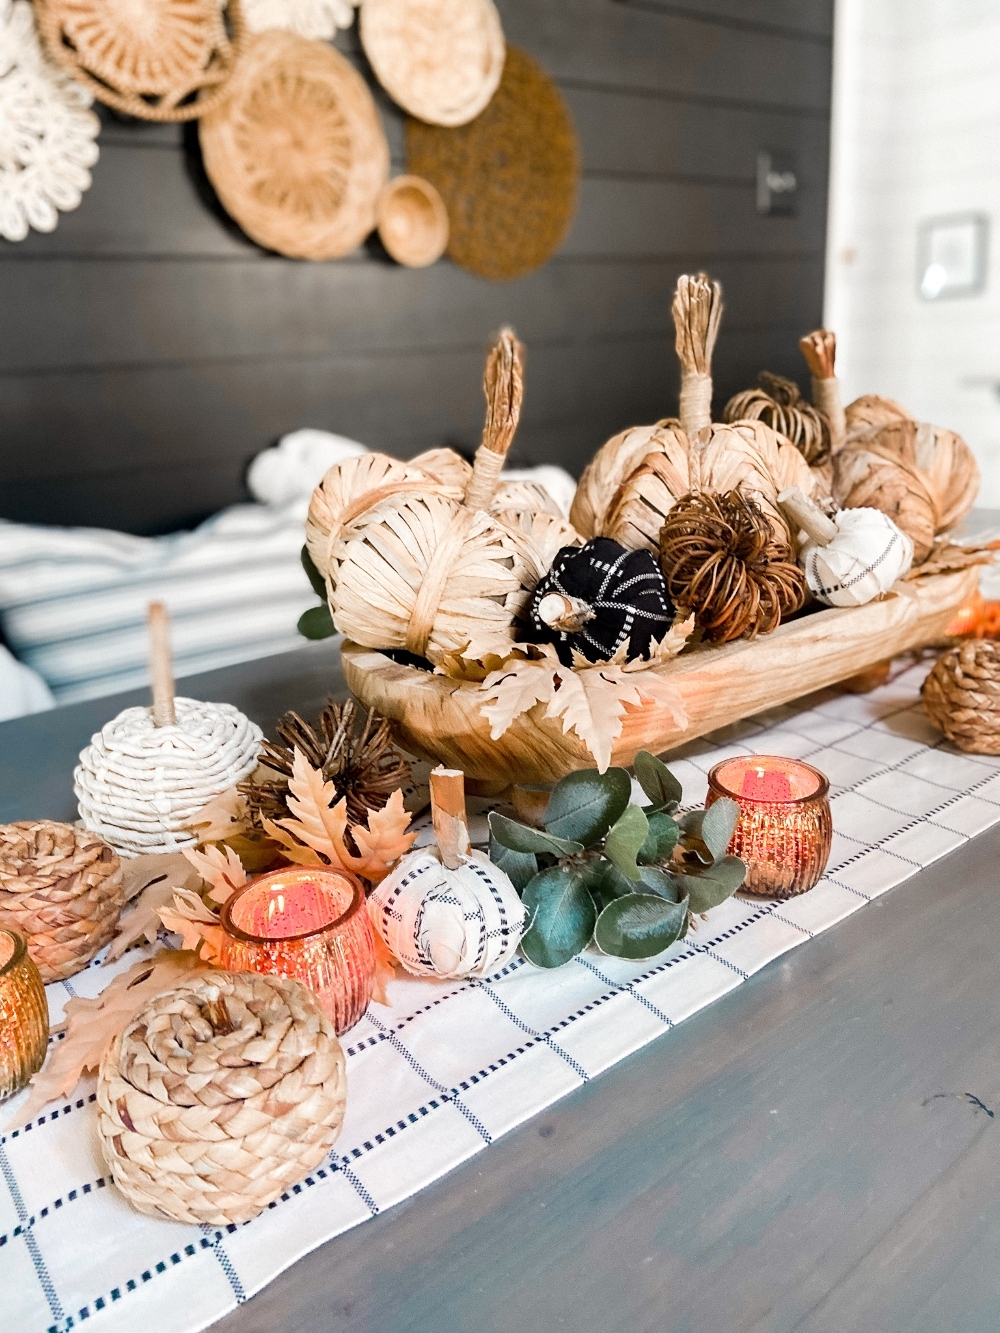 Boho Cottage Fall Tablescape. Create a warm and inviting table by making a DIY table runner, pillows and a beautiful footed bowl centerpiece filled with textured, fabric-covered pumpkins and leaves.